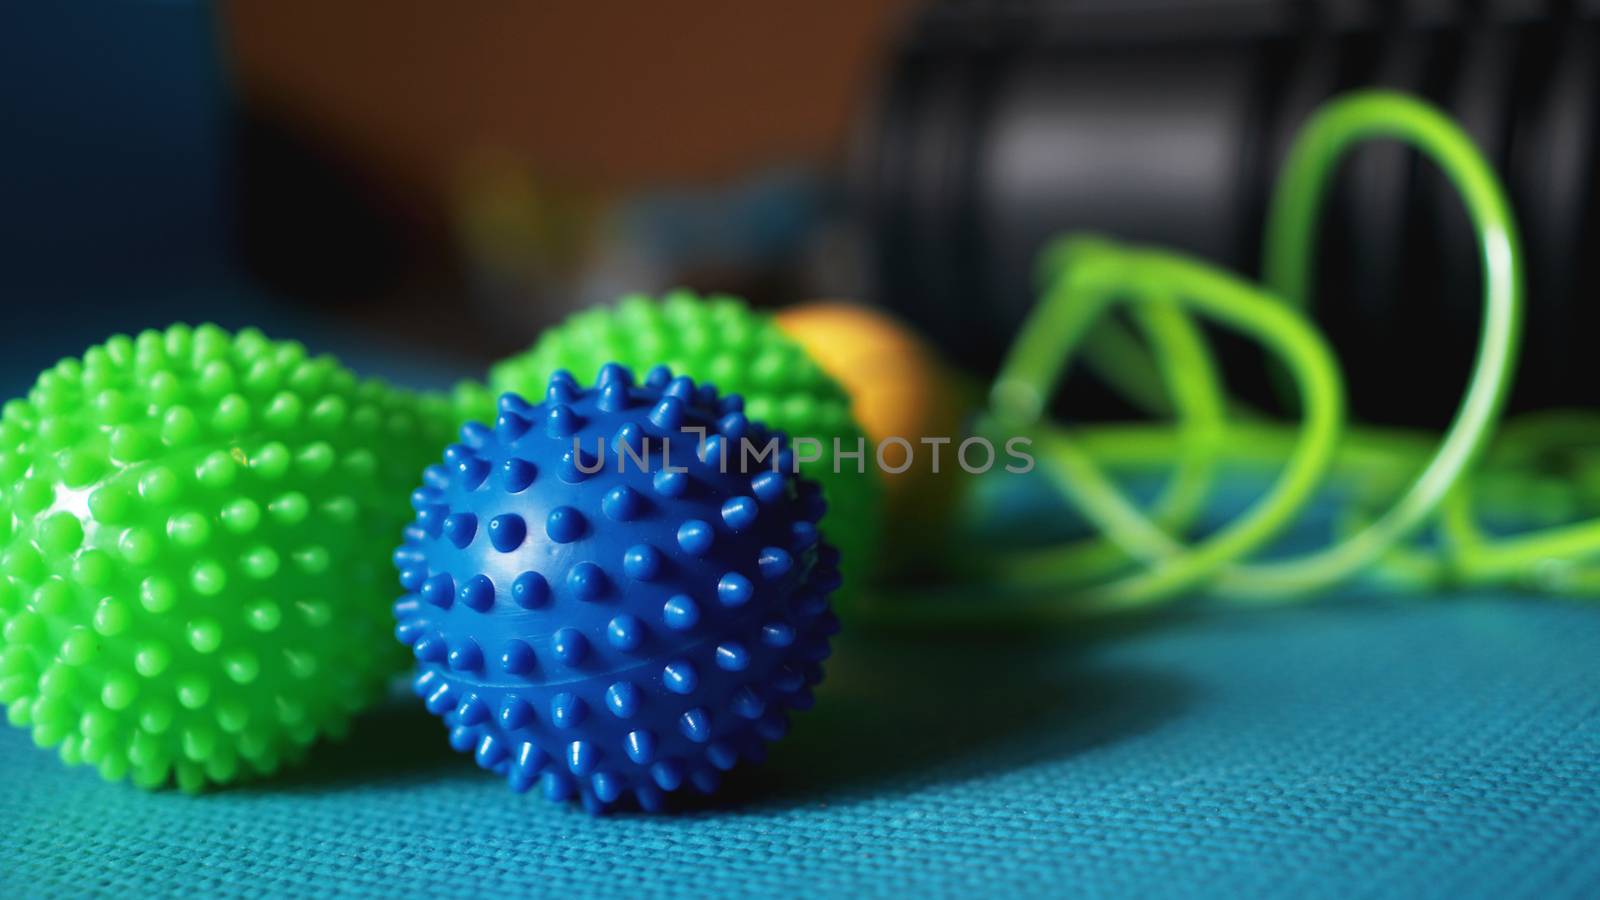 Massage ball roller for self massage, reflexology and myofascial release on blue by natali_brill